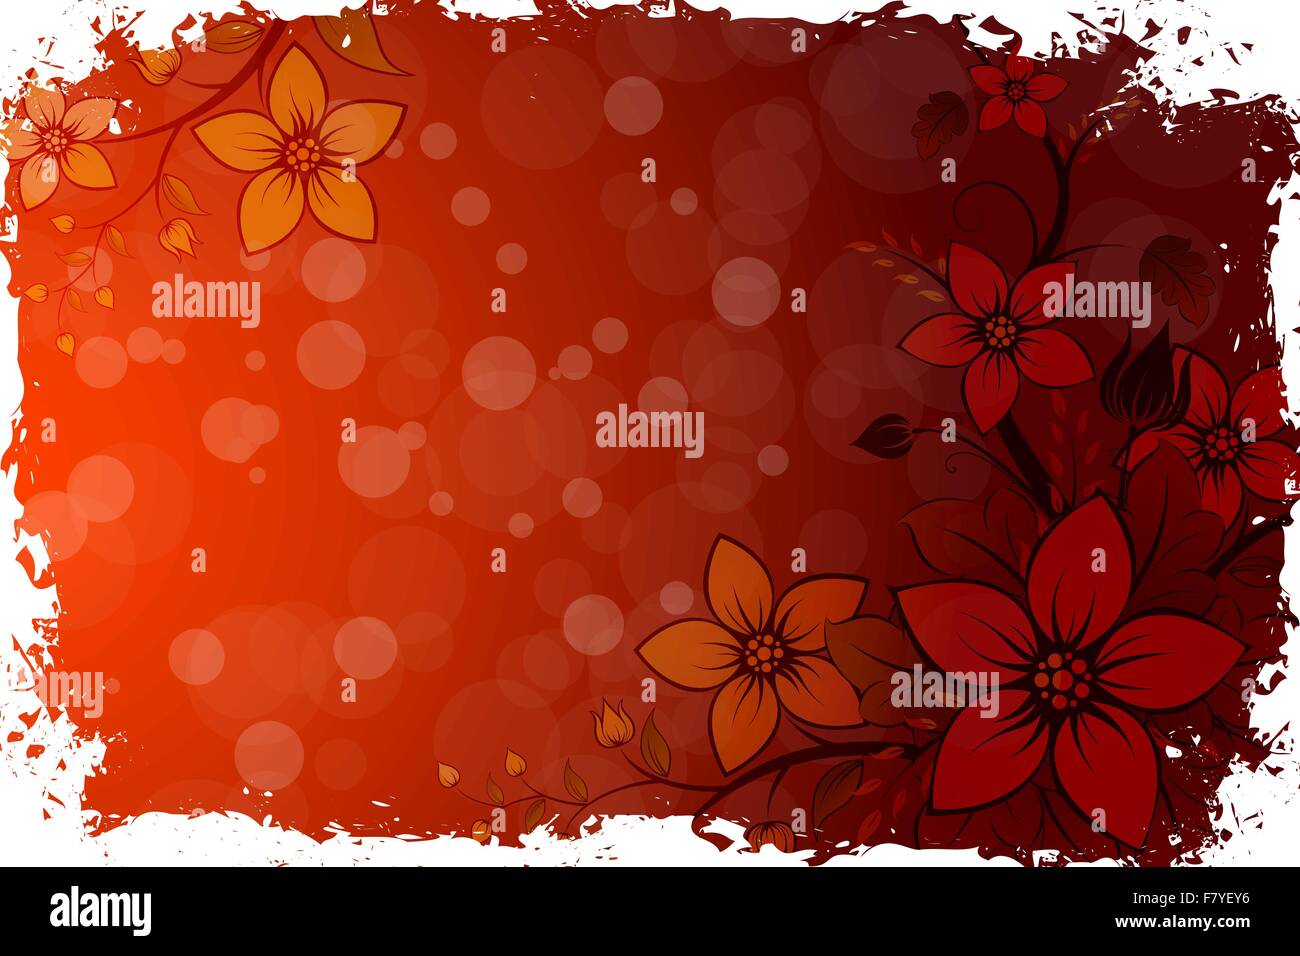 Grungy Flower Background Stock Vector